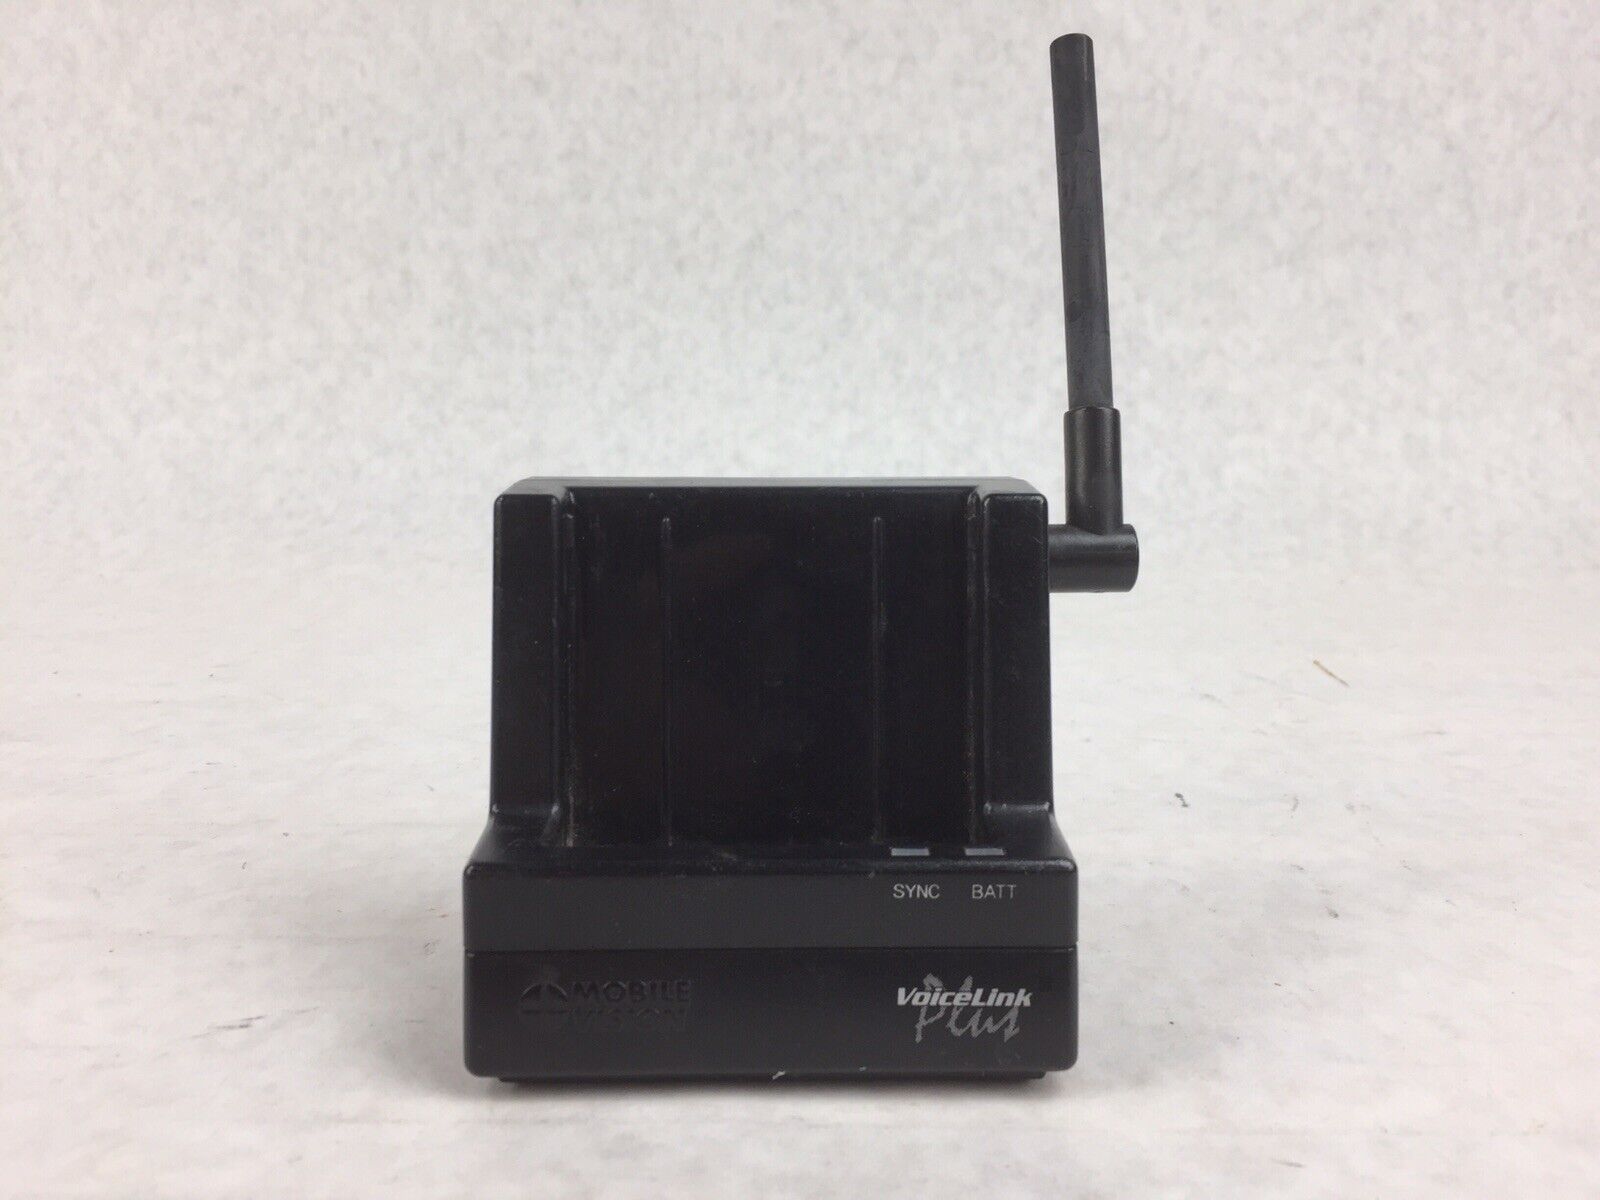 L3 Communications MV-VLP-DS VoiceLink Plus Charger Base with Antenna and Mount